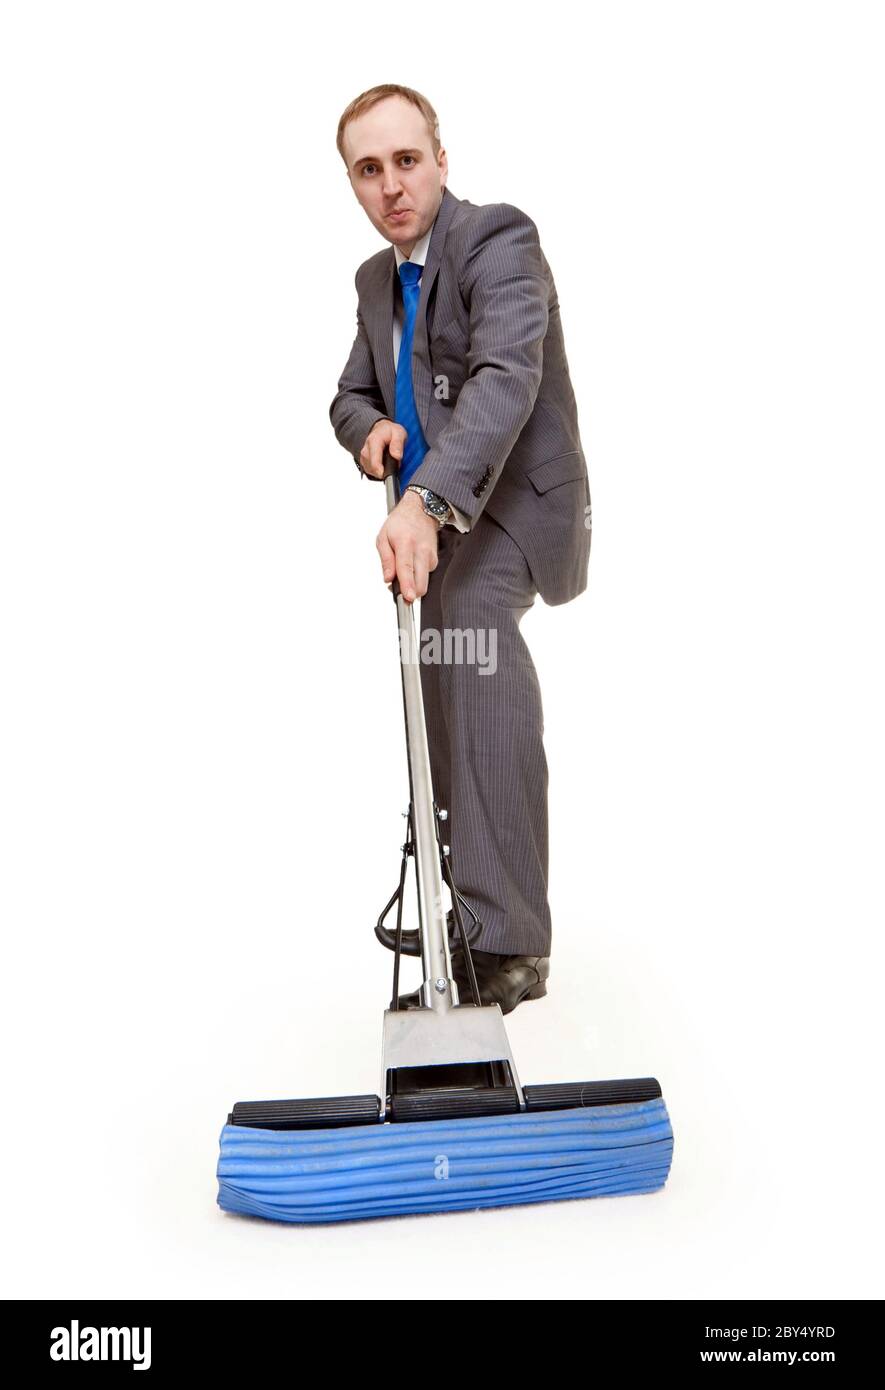 businessman with a mop Stock Photo